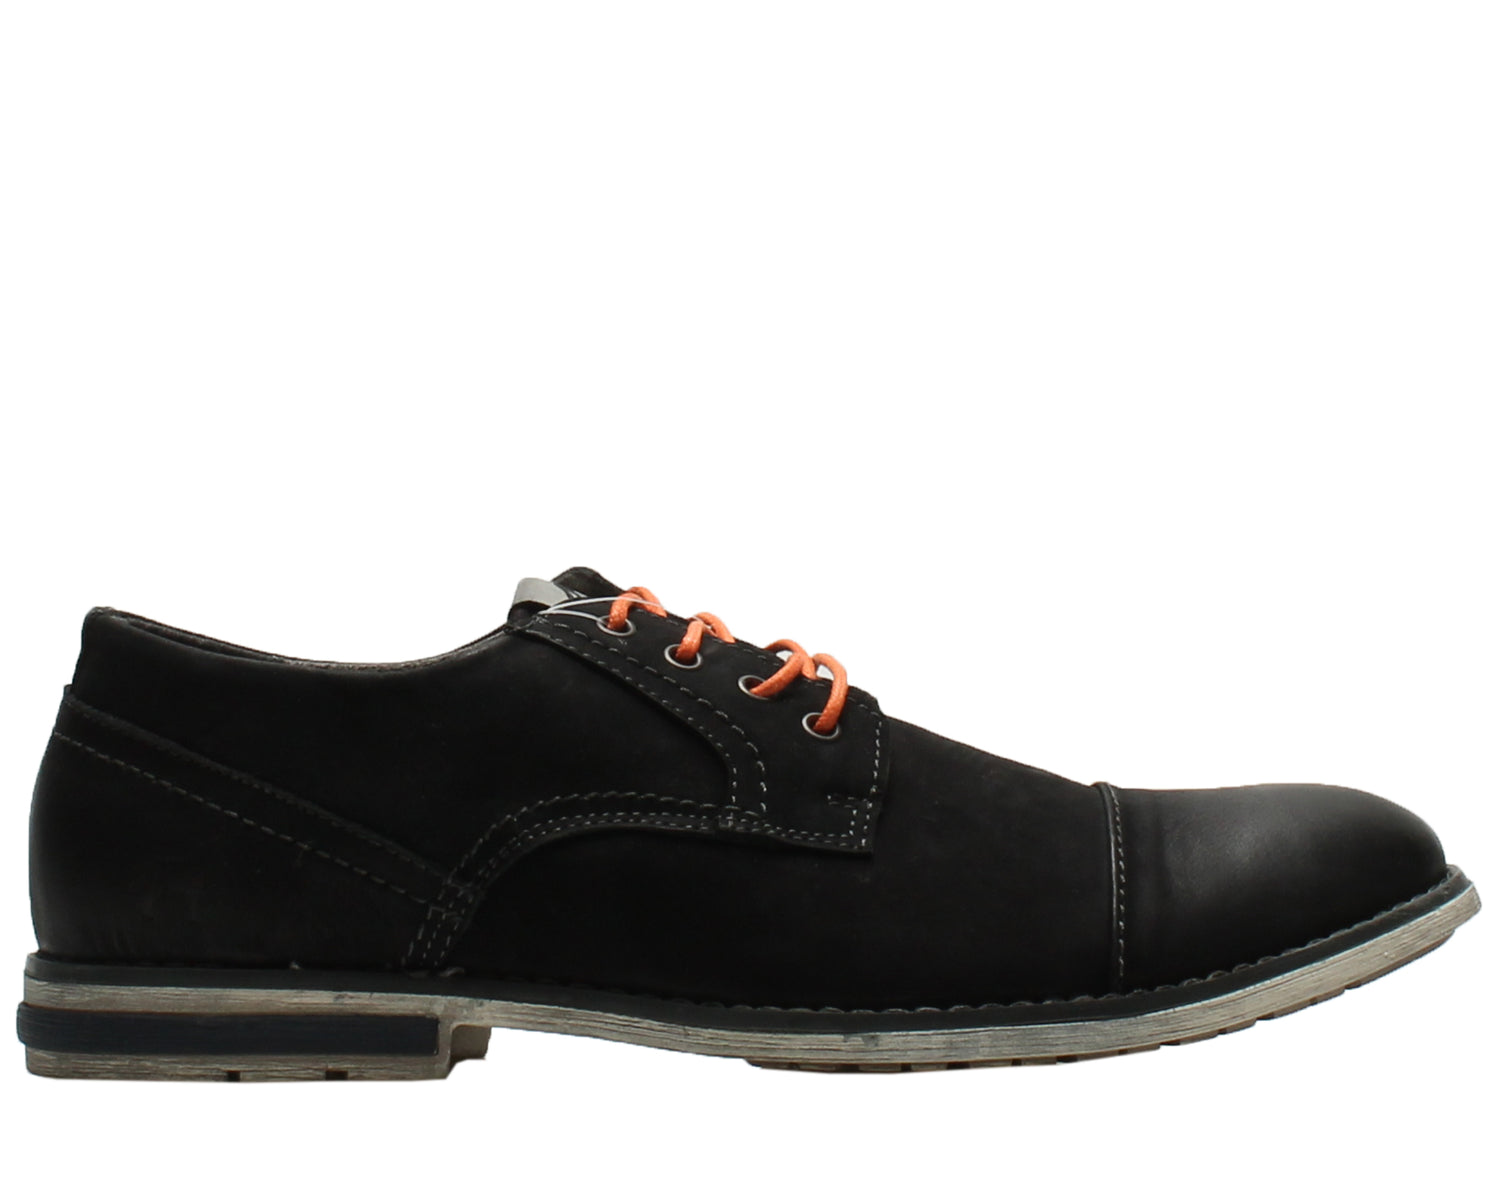 Howling Wolf Springs Cap Toe Oxford Men's Shoes